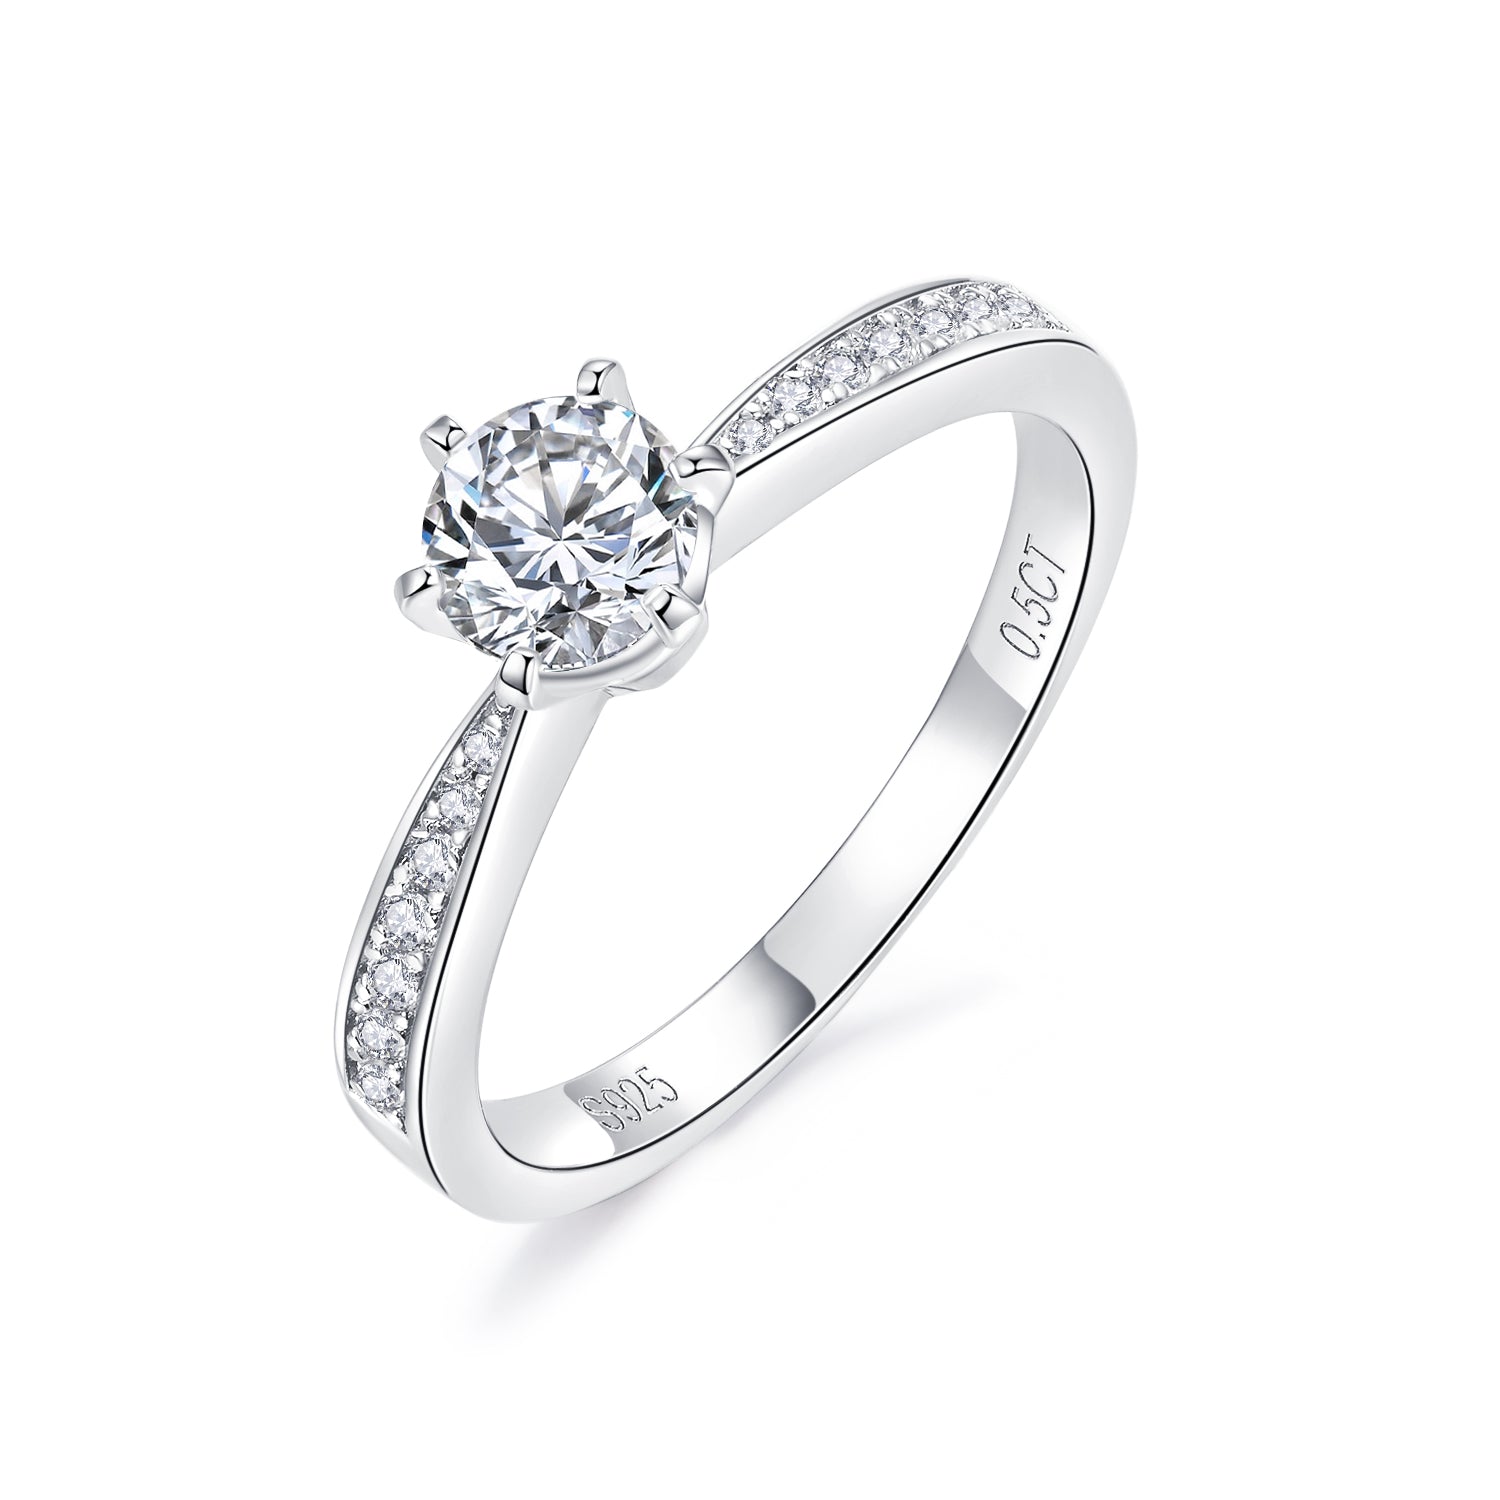 No5.RM1005 0.5/1.0/2.0/3.0 CTW 6A Moissanite 18K S925 Side Stones 6 Prongs Band Ring